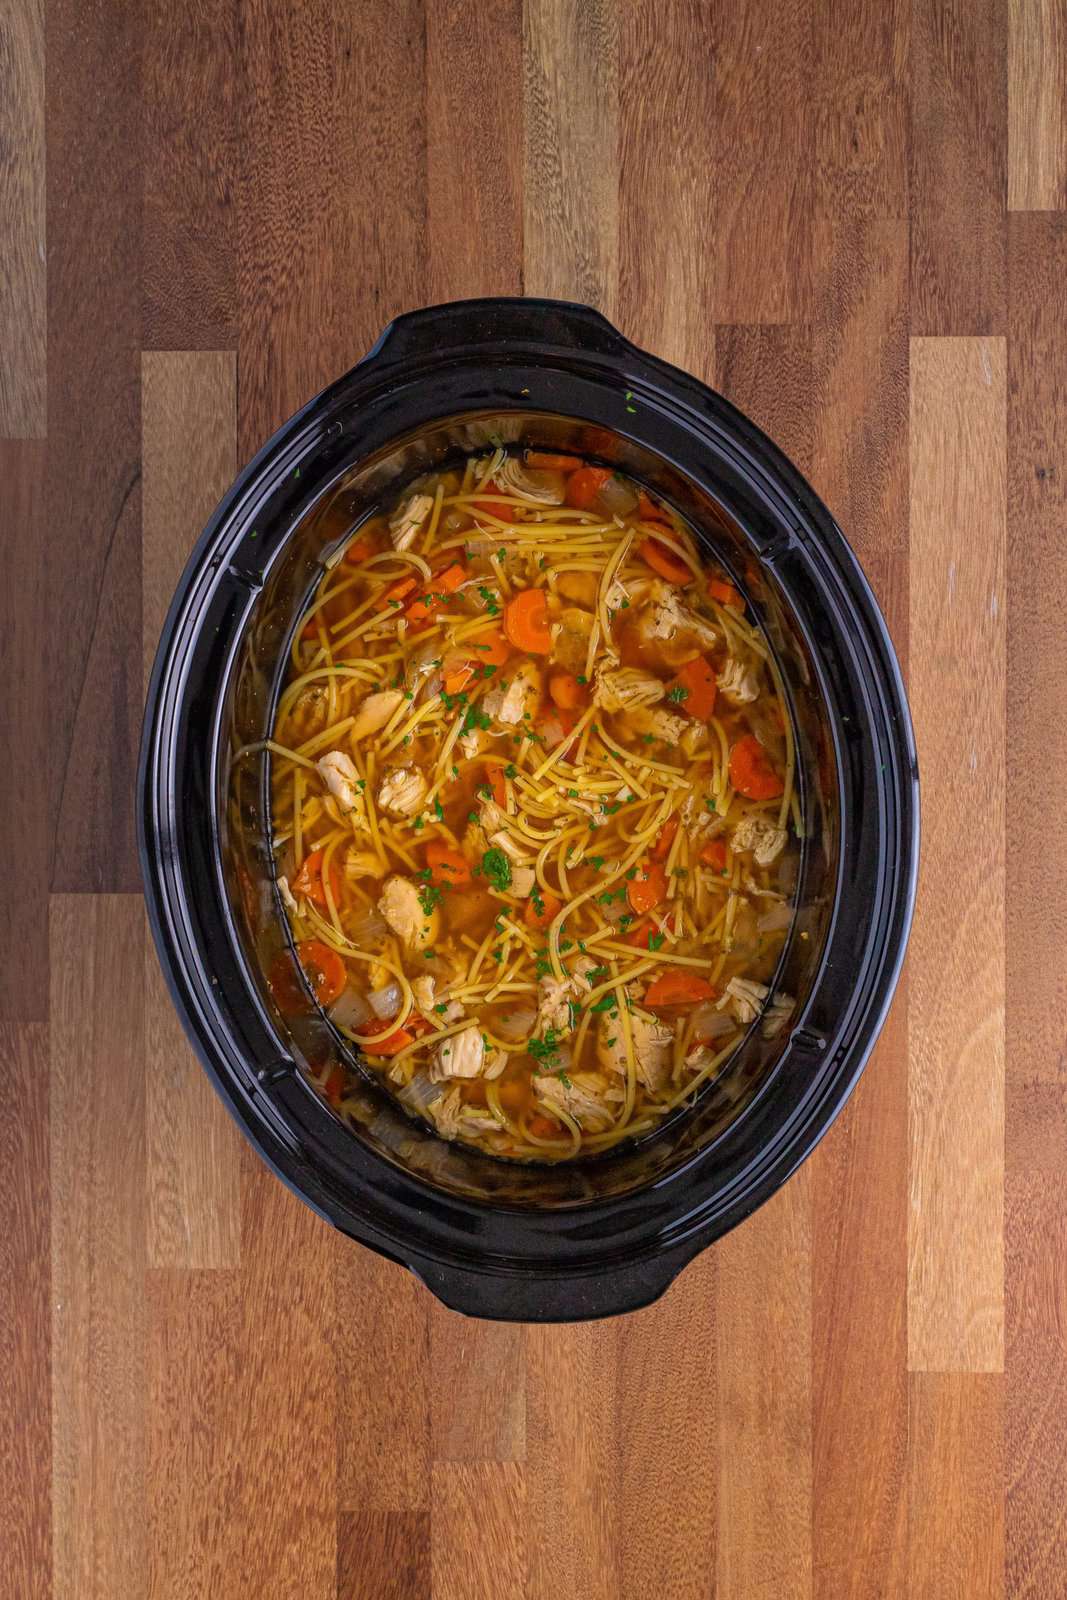 A Slow Cooker with completed Chicken Noodle Soup using spaghetti.